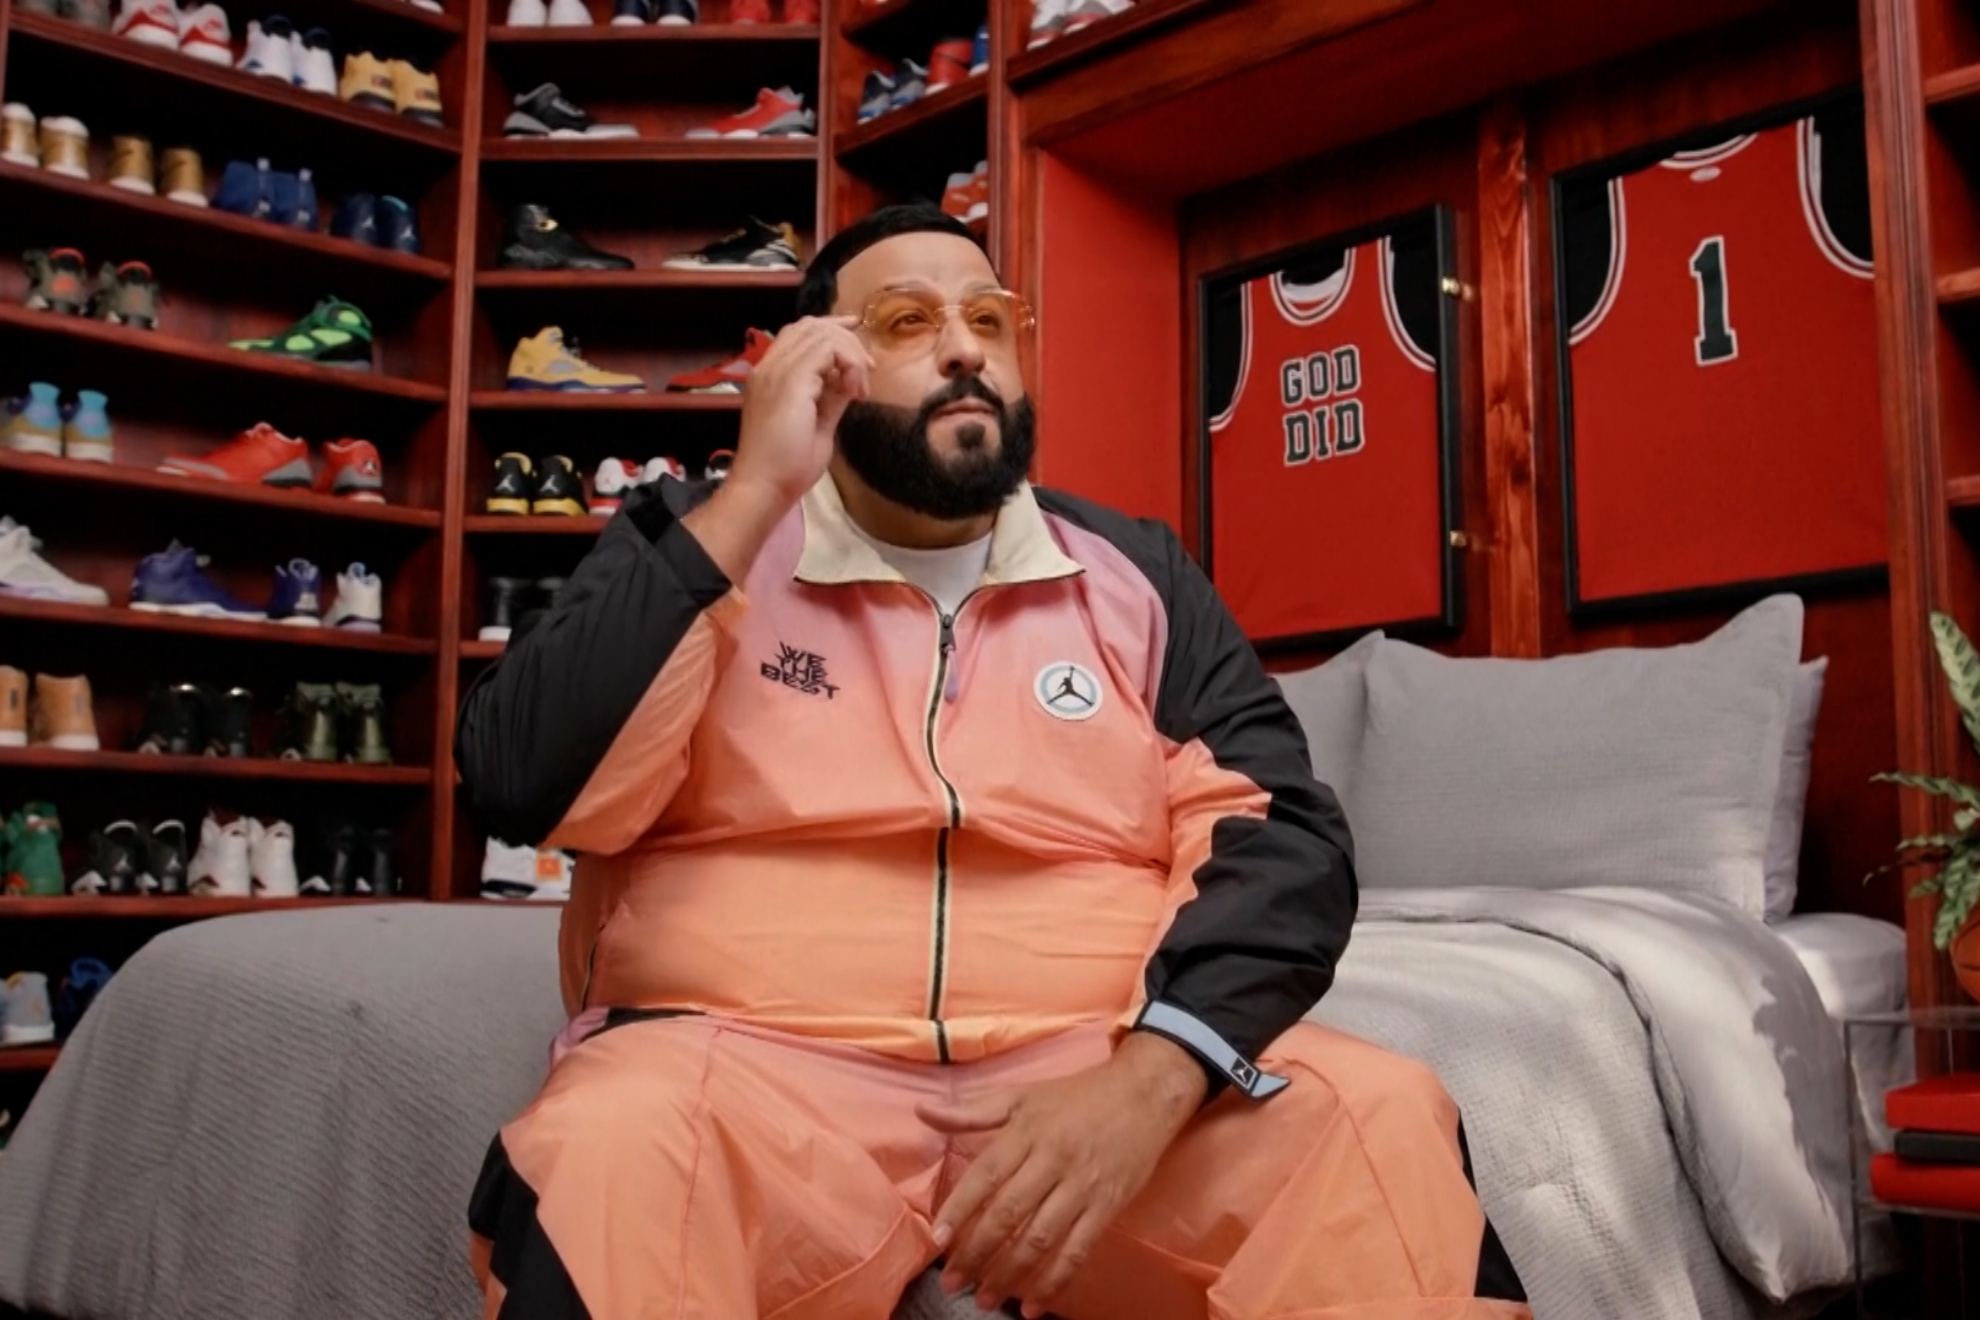 DJ Khaled's sneaker closet is now on Airbnb and it only costs $11 per night